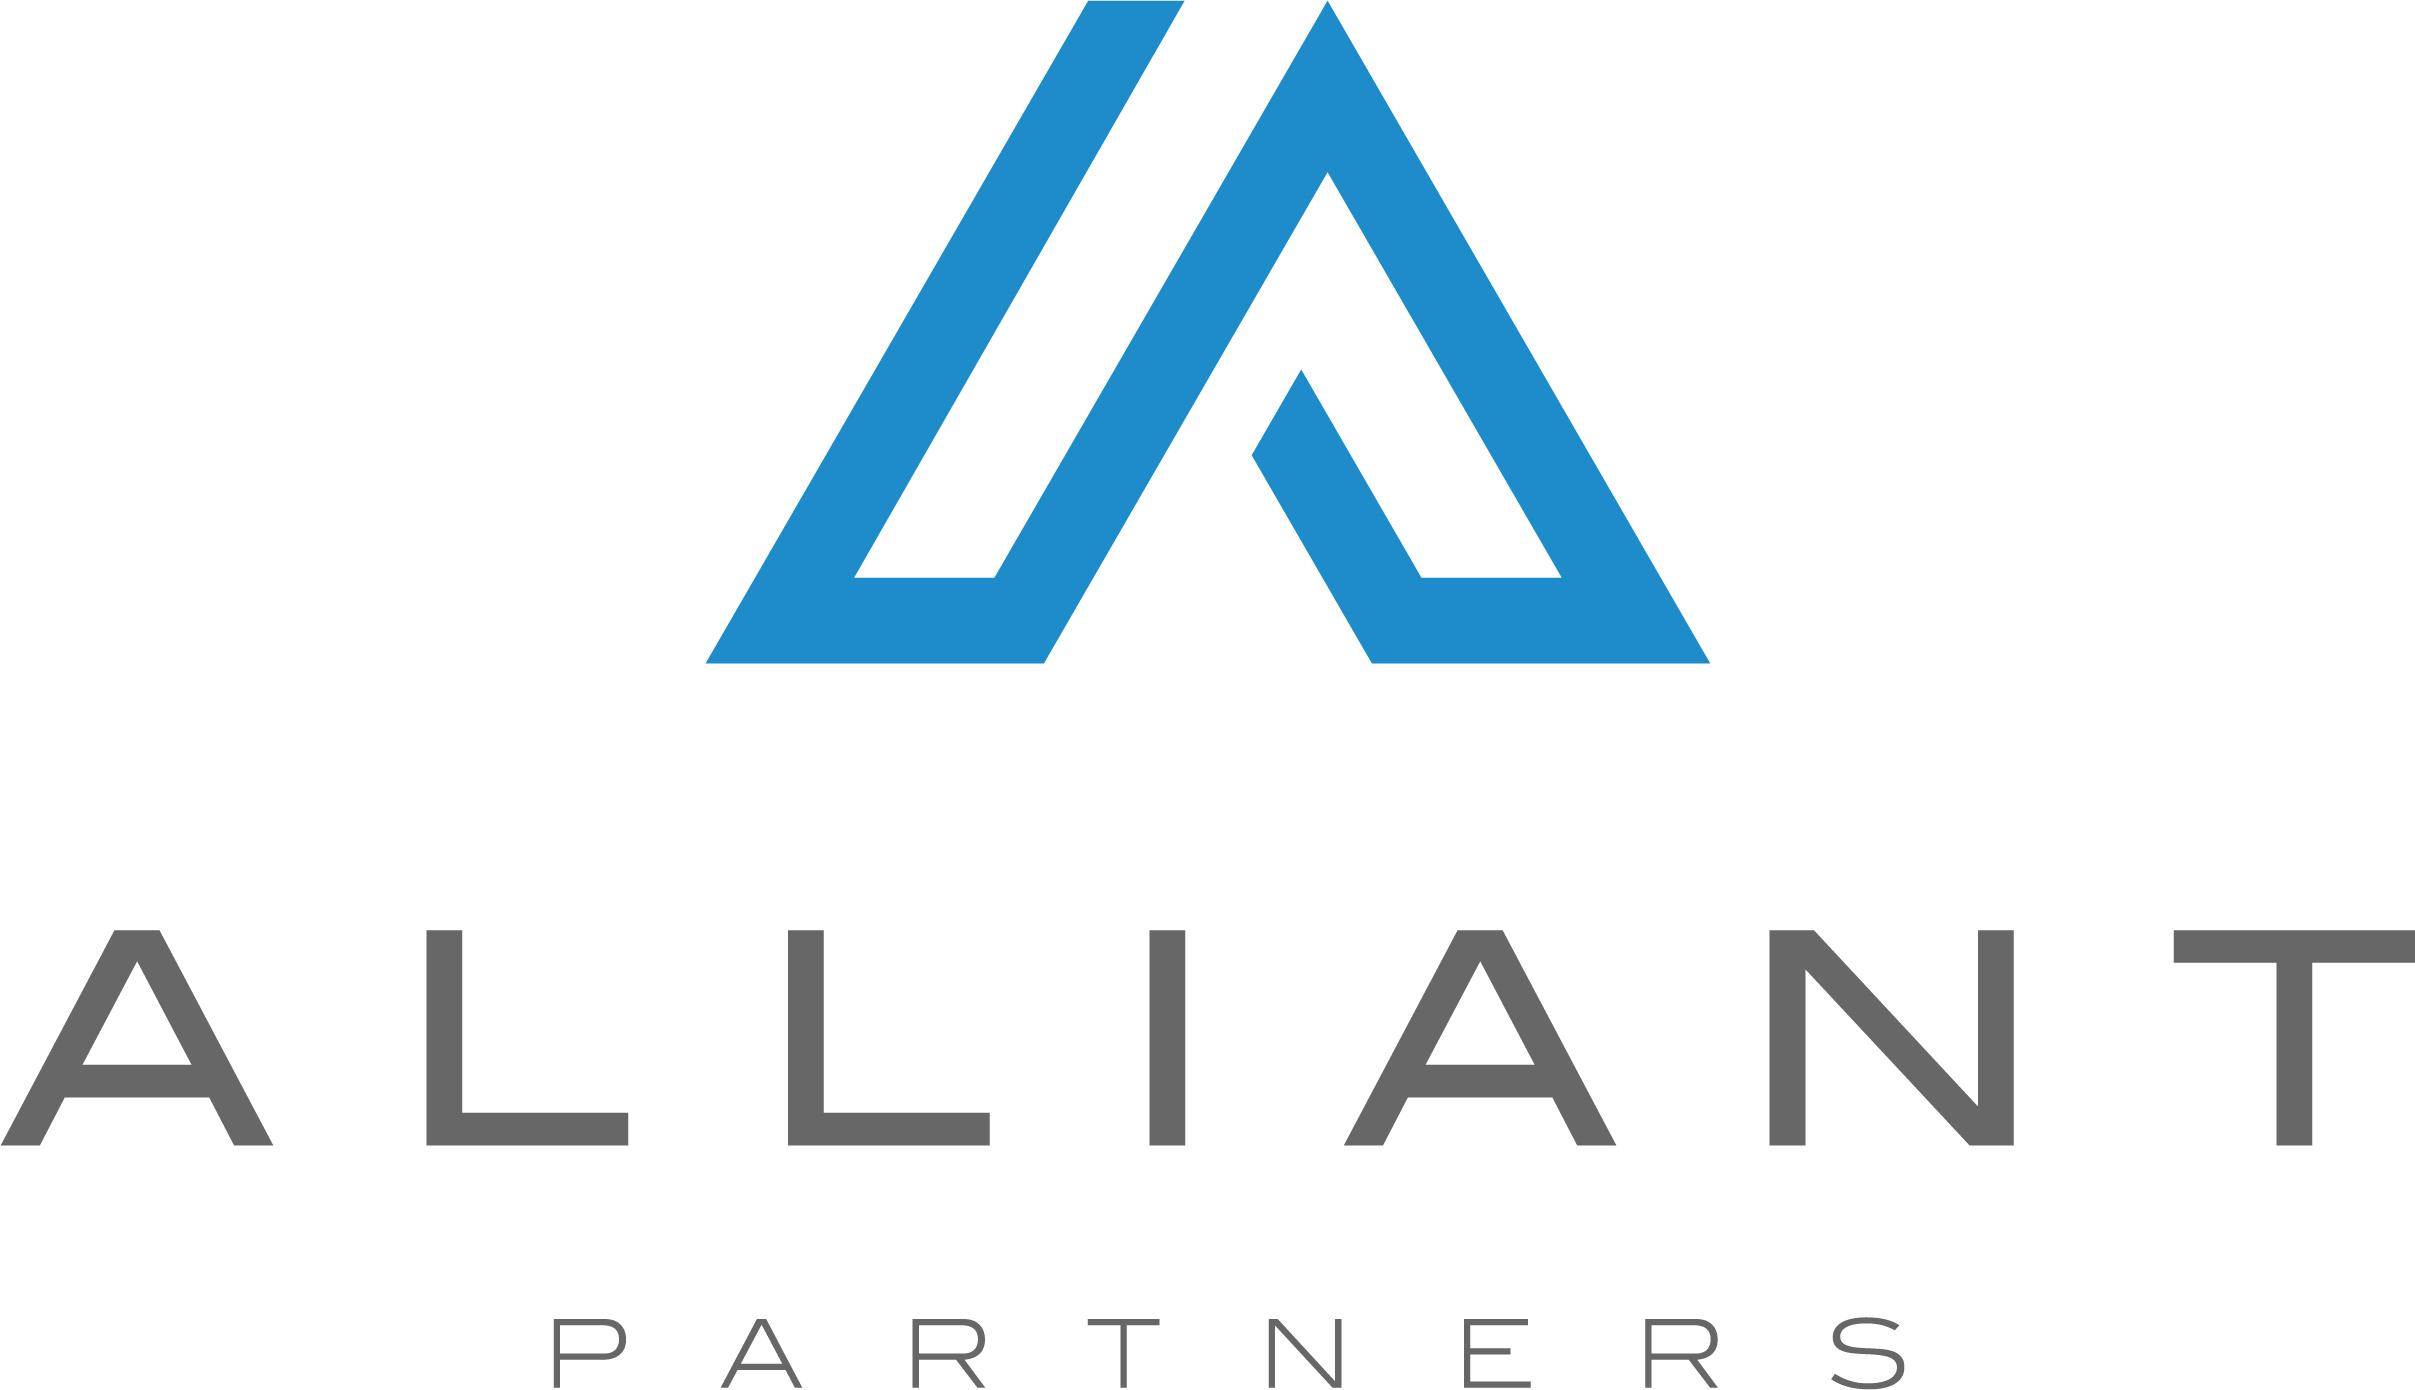 Alliant Partners Brand Identity Official